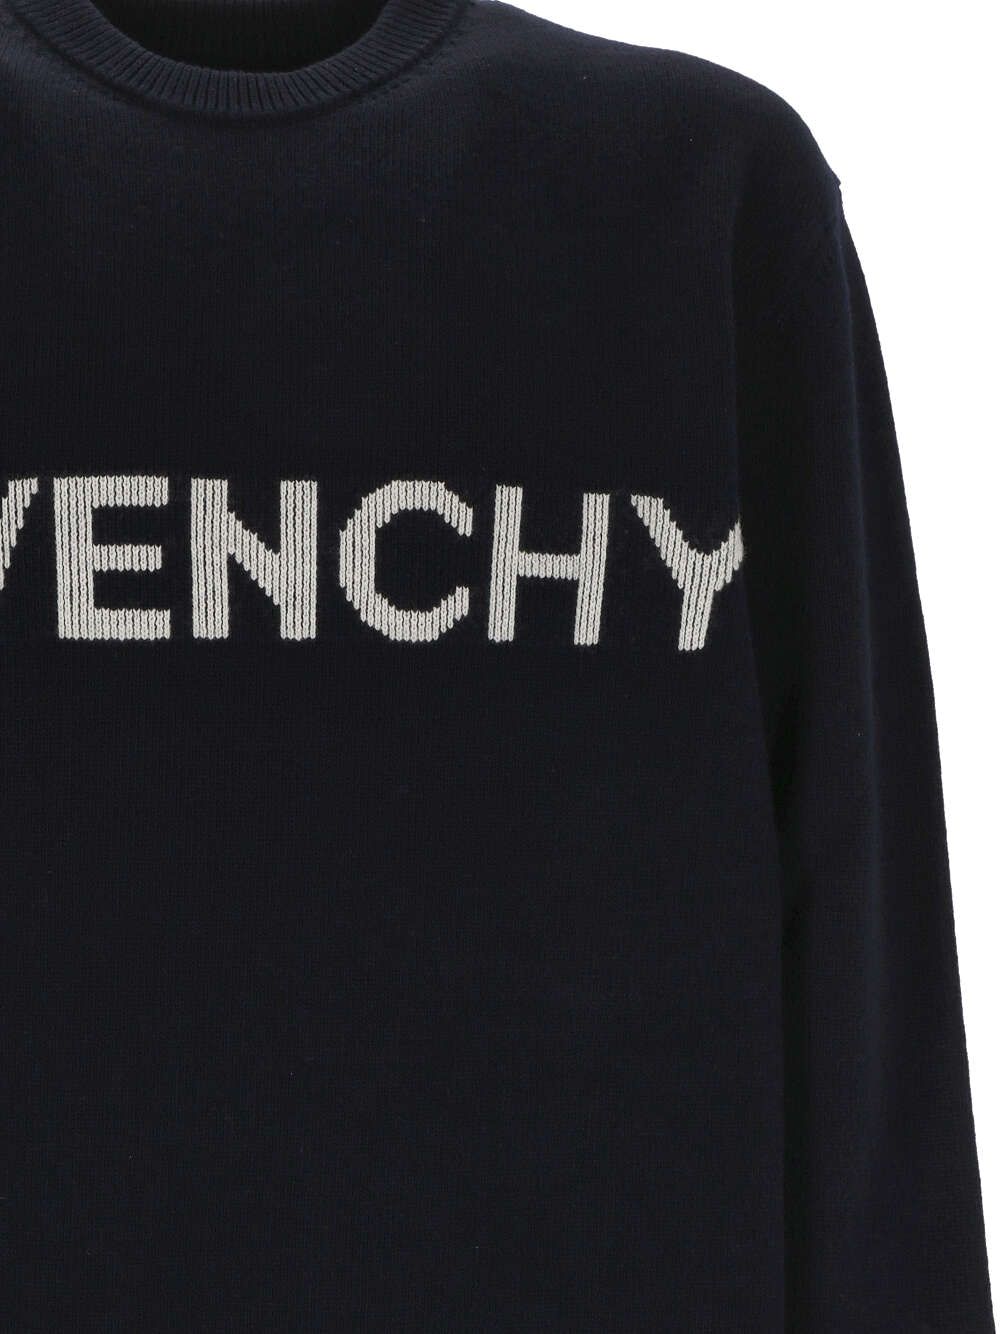 Givenchy Navy/red sweaters